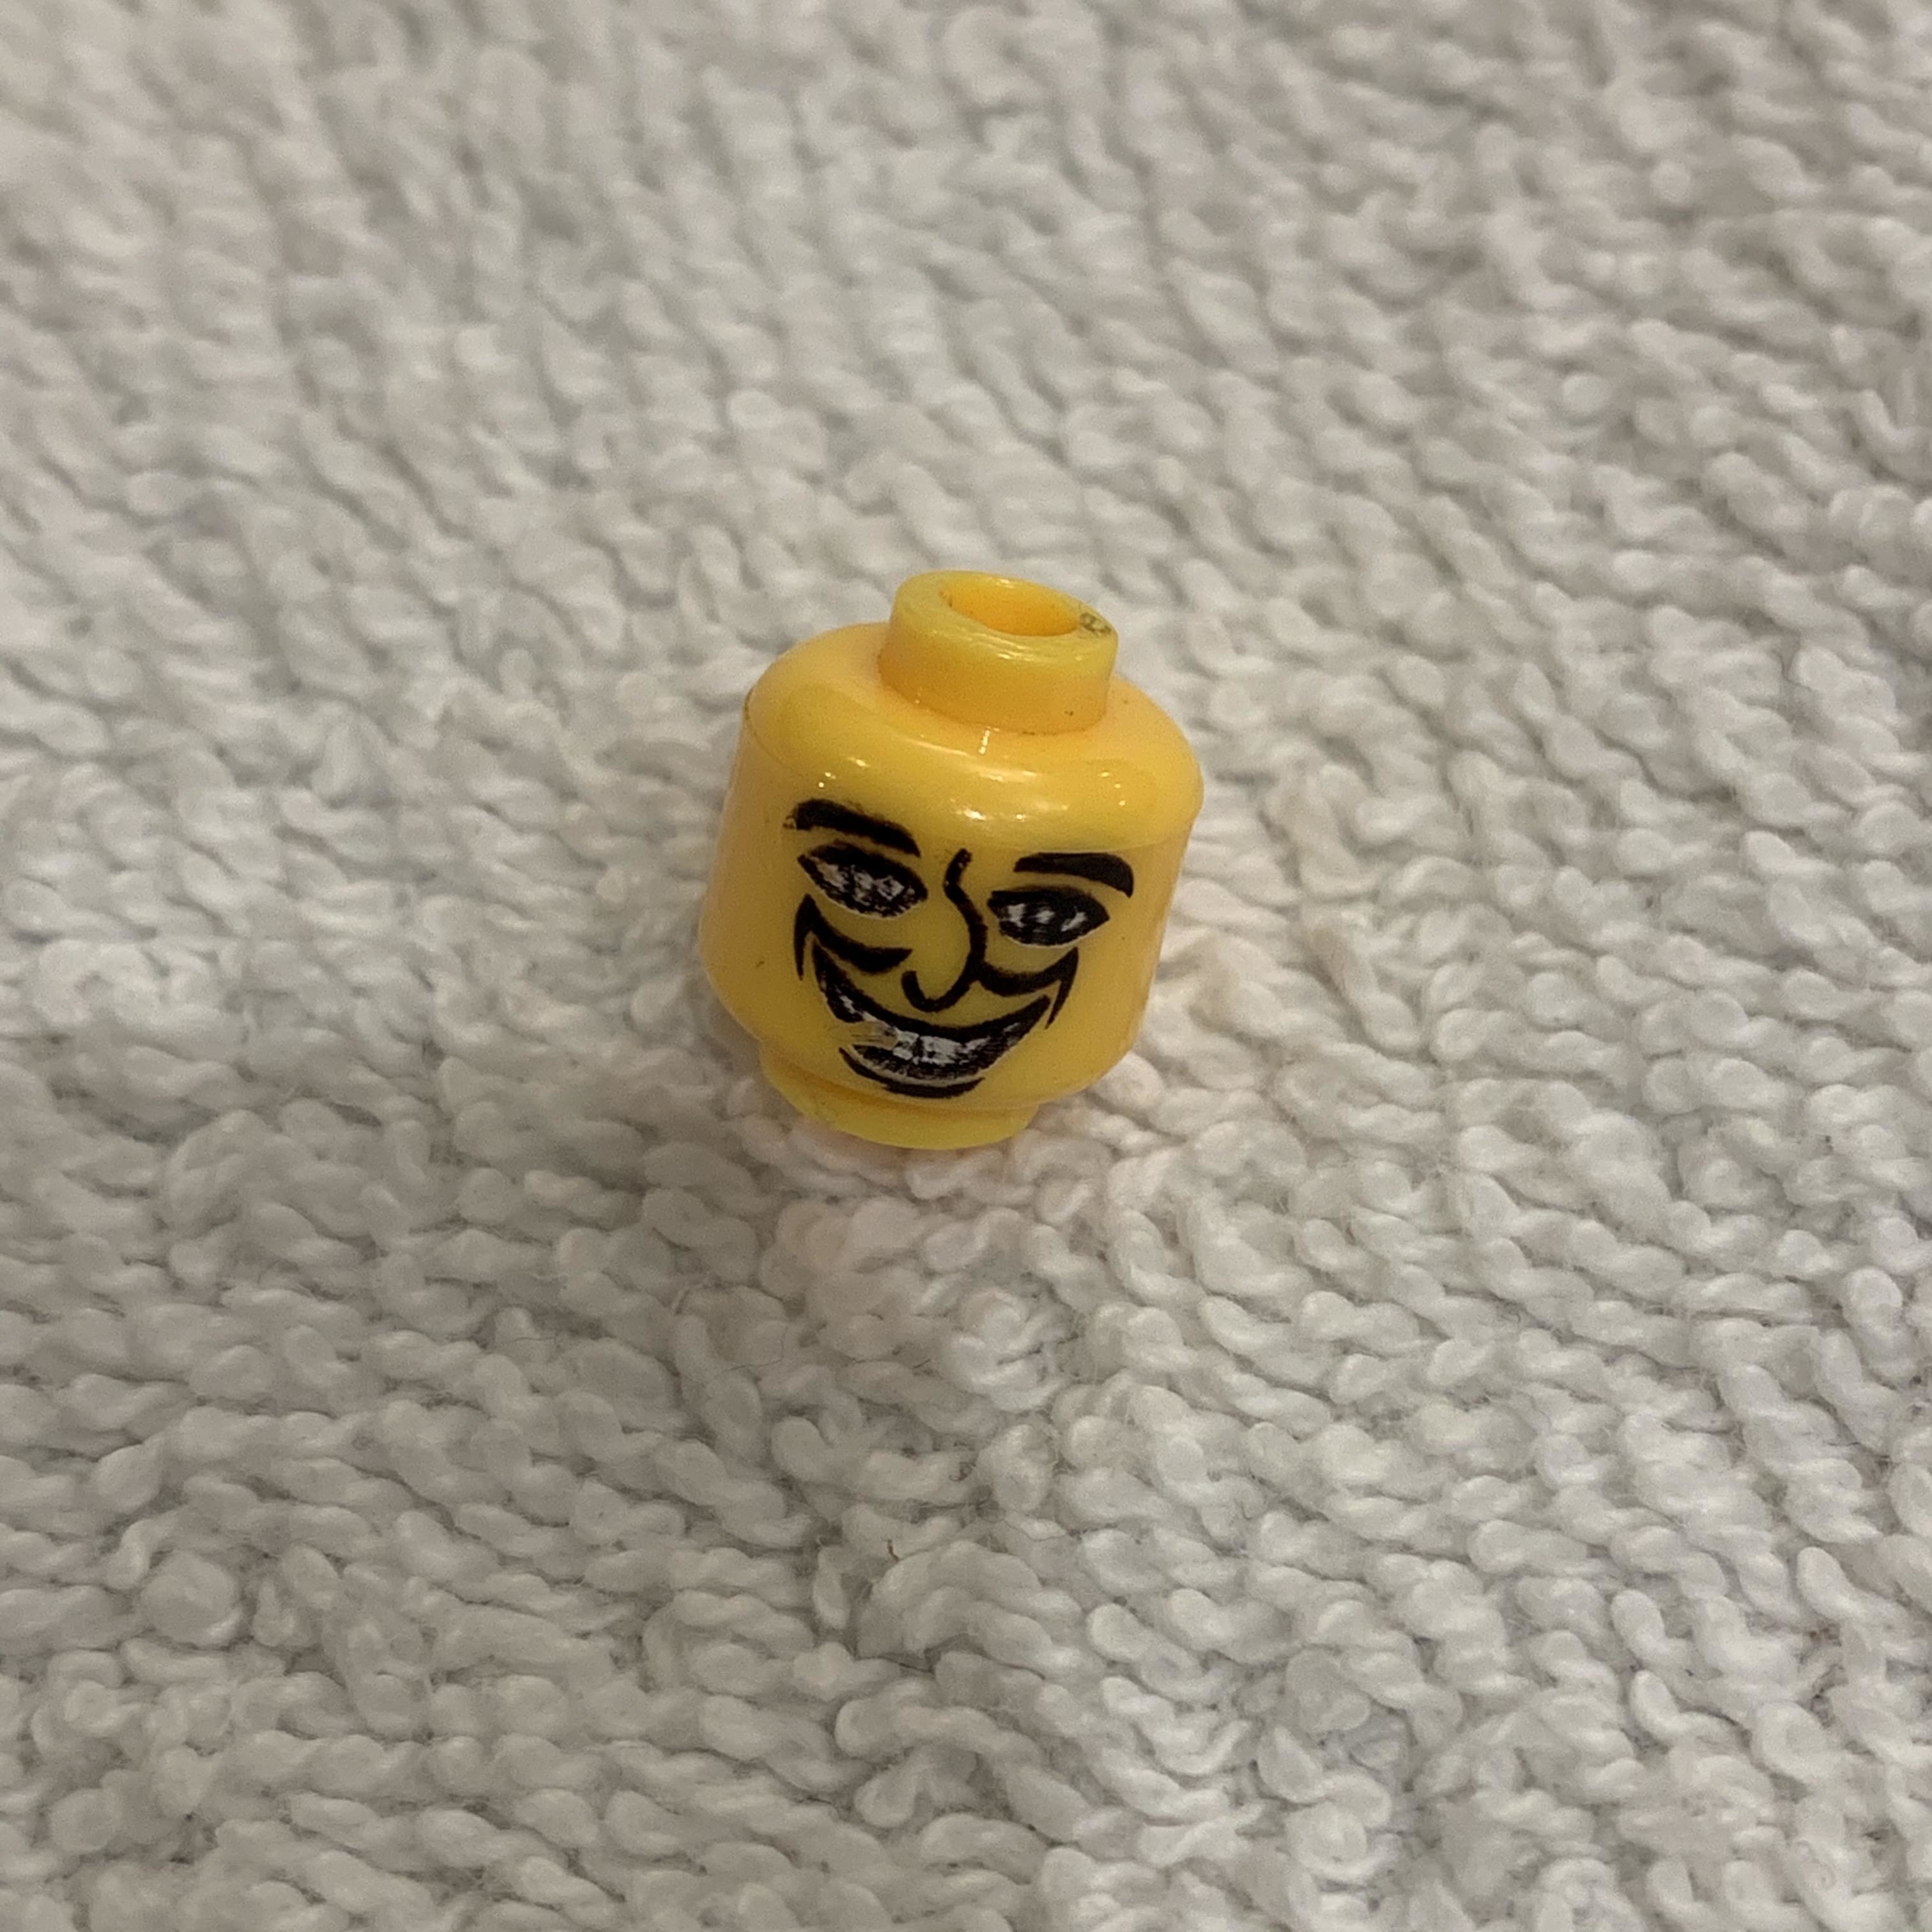 A Lego with a scary smiley face